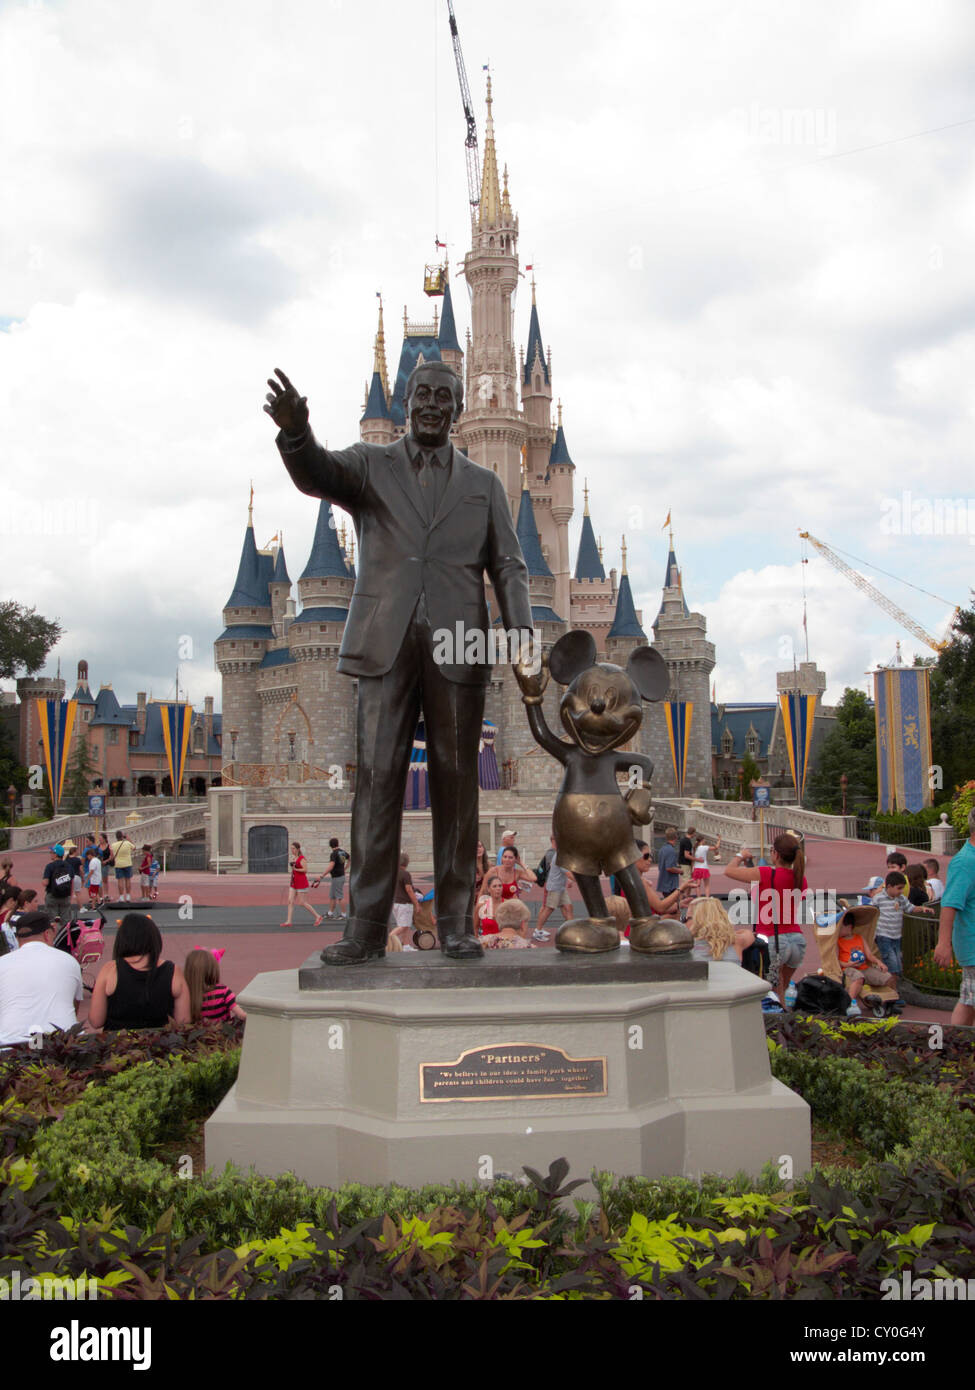 partners statue of walt disney and mickey mouse in front